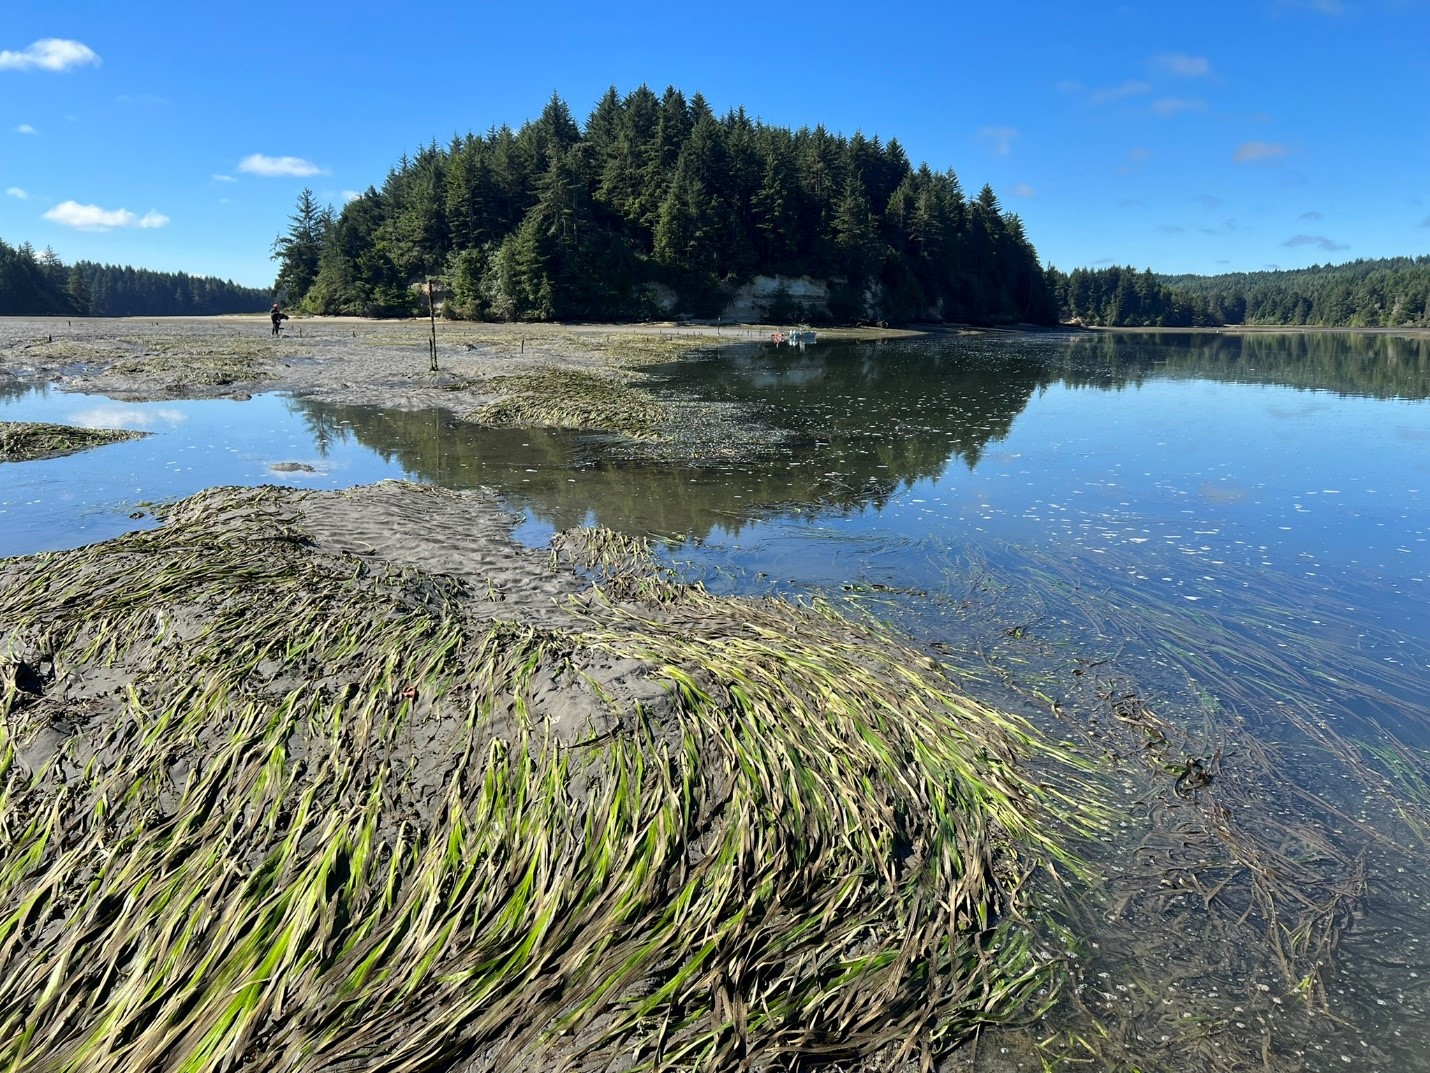 Close up view of eel grass with shallow water around and evergreen trees in the distance.